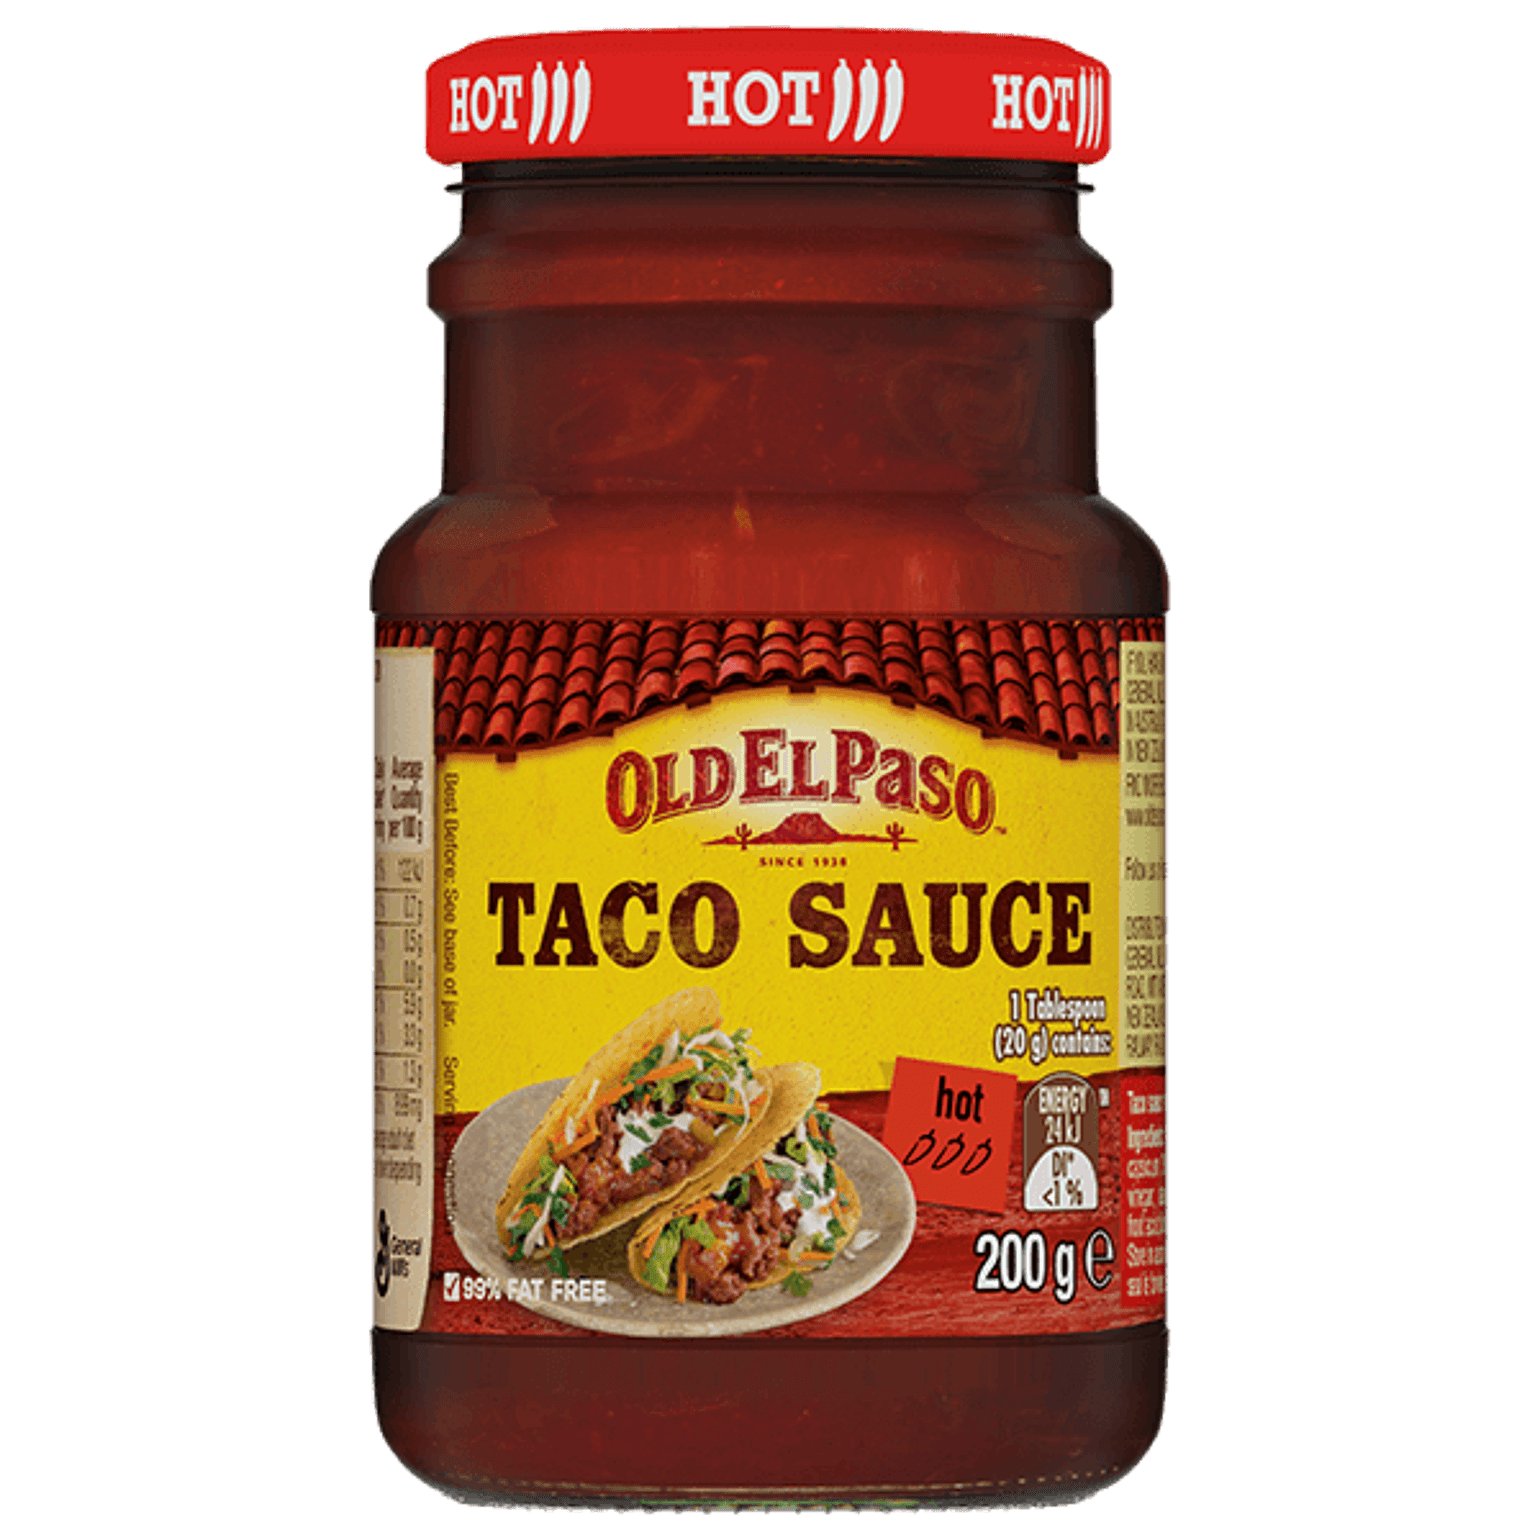 a glass jar of Old El Paso's hot taco sauce (200g)